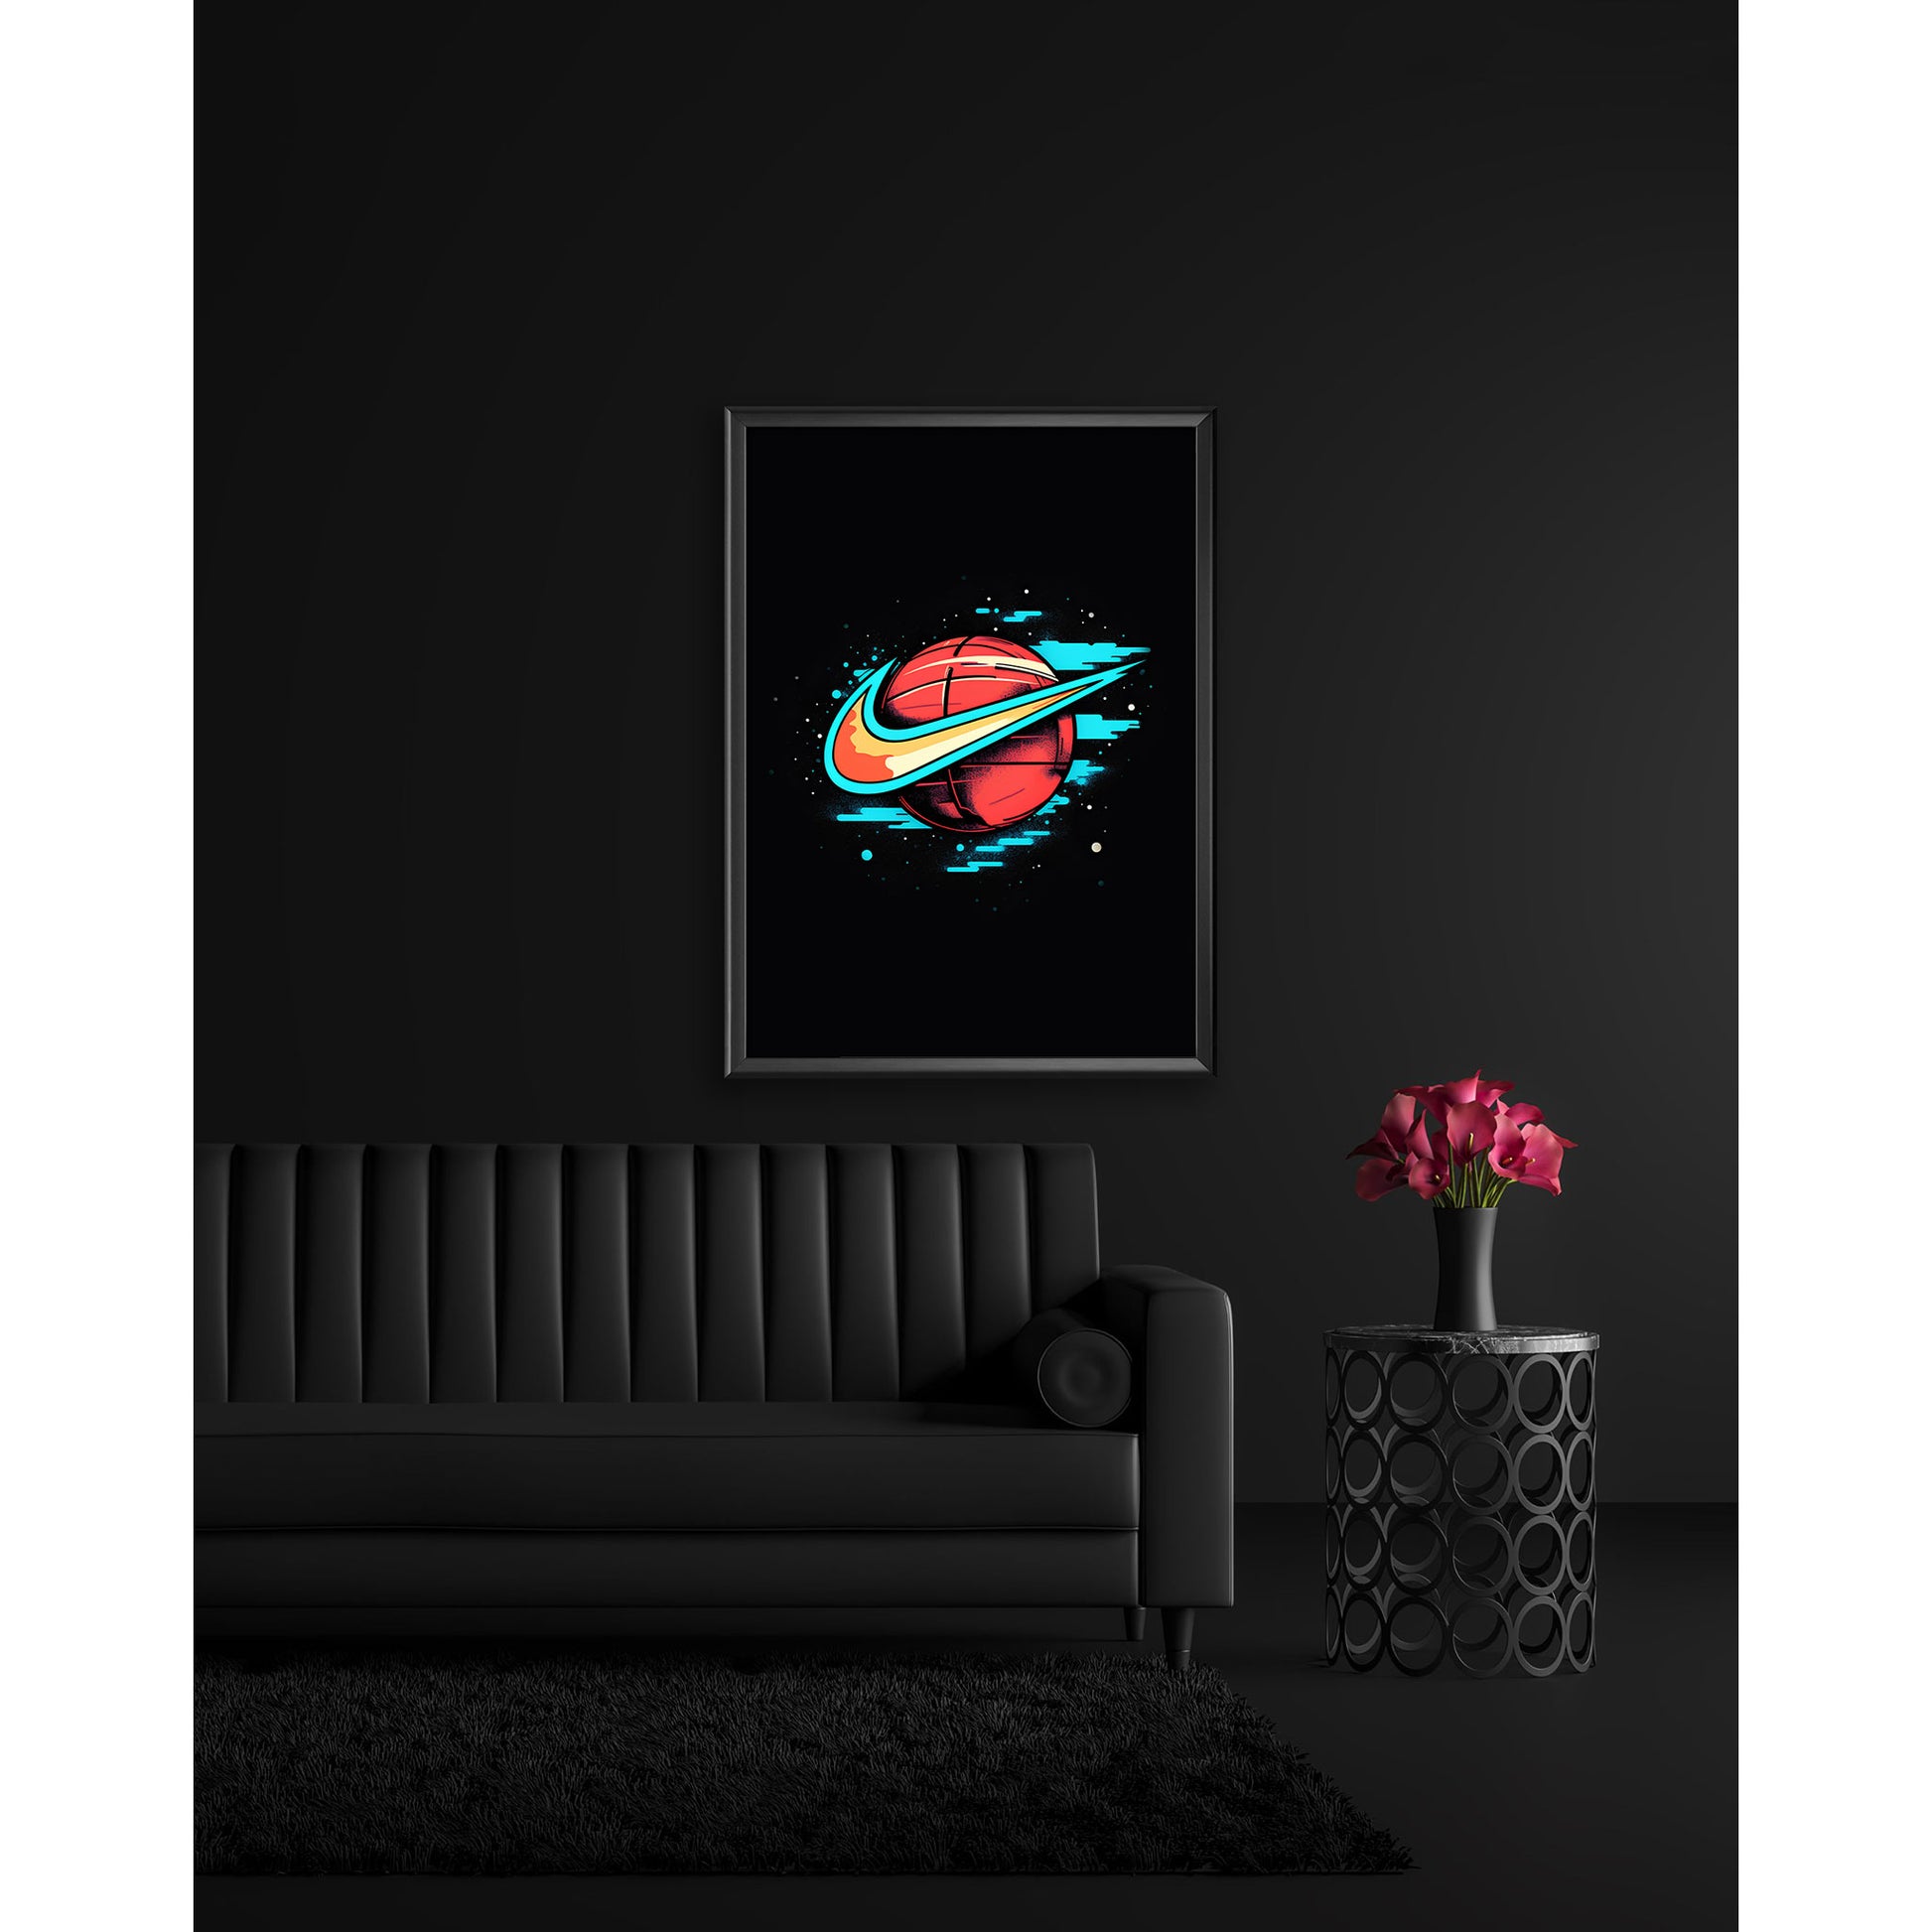 SnkrsPrints  Nike Swoosh Space Poster